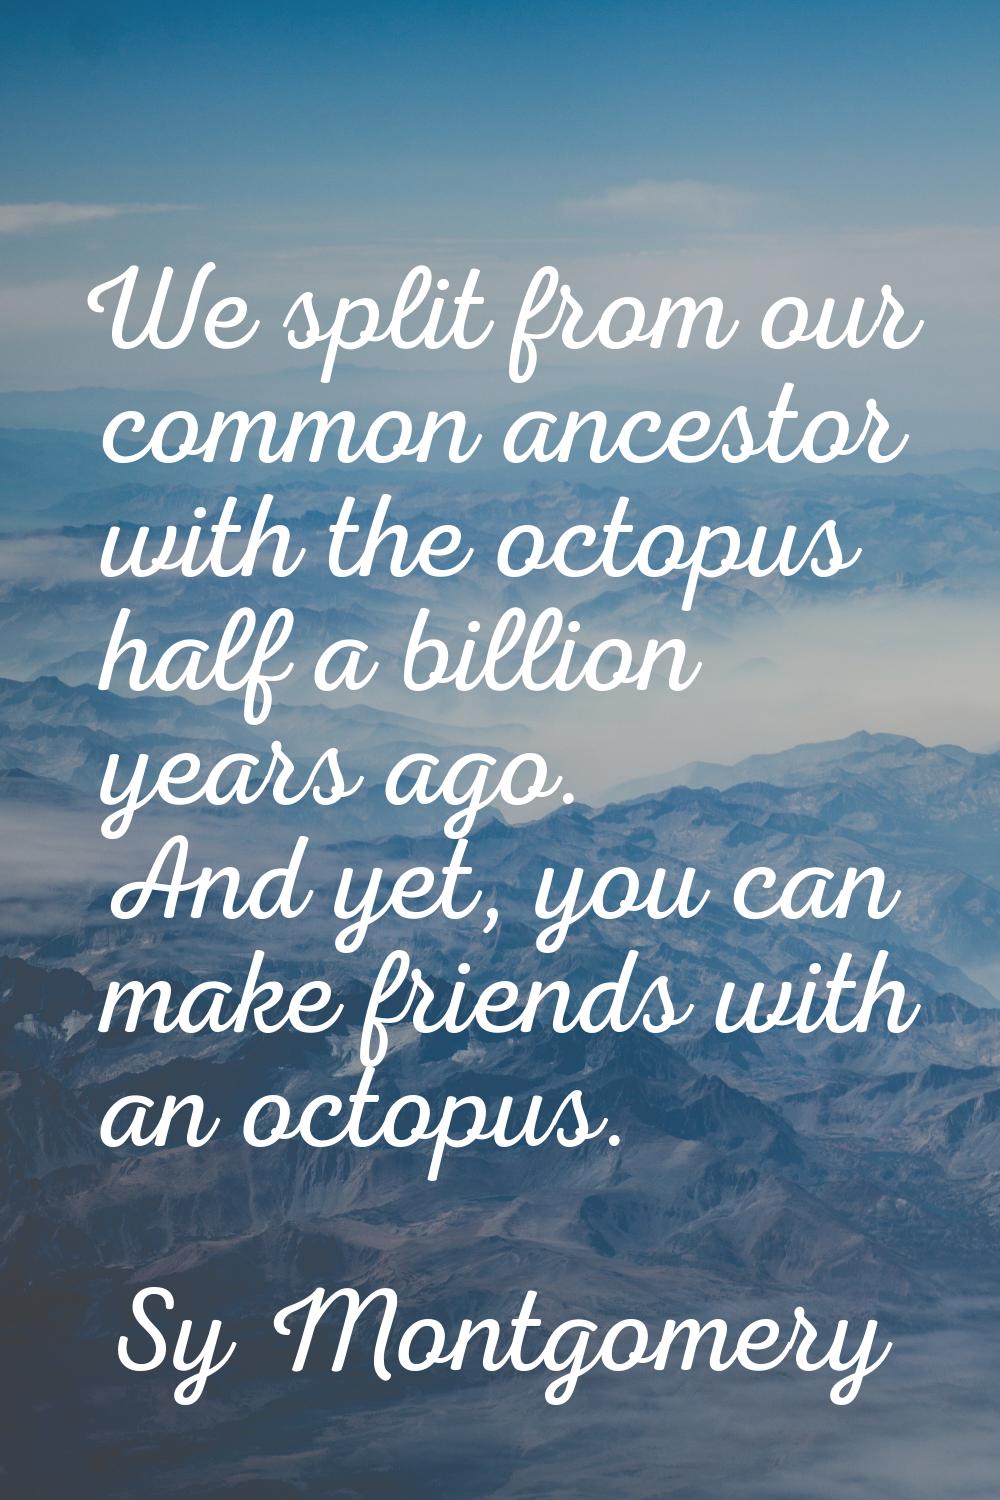 We split from our common ancestor with the octopus half a billion years ago. And yet, you can make 